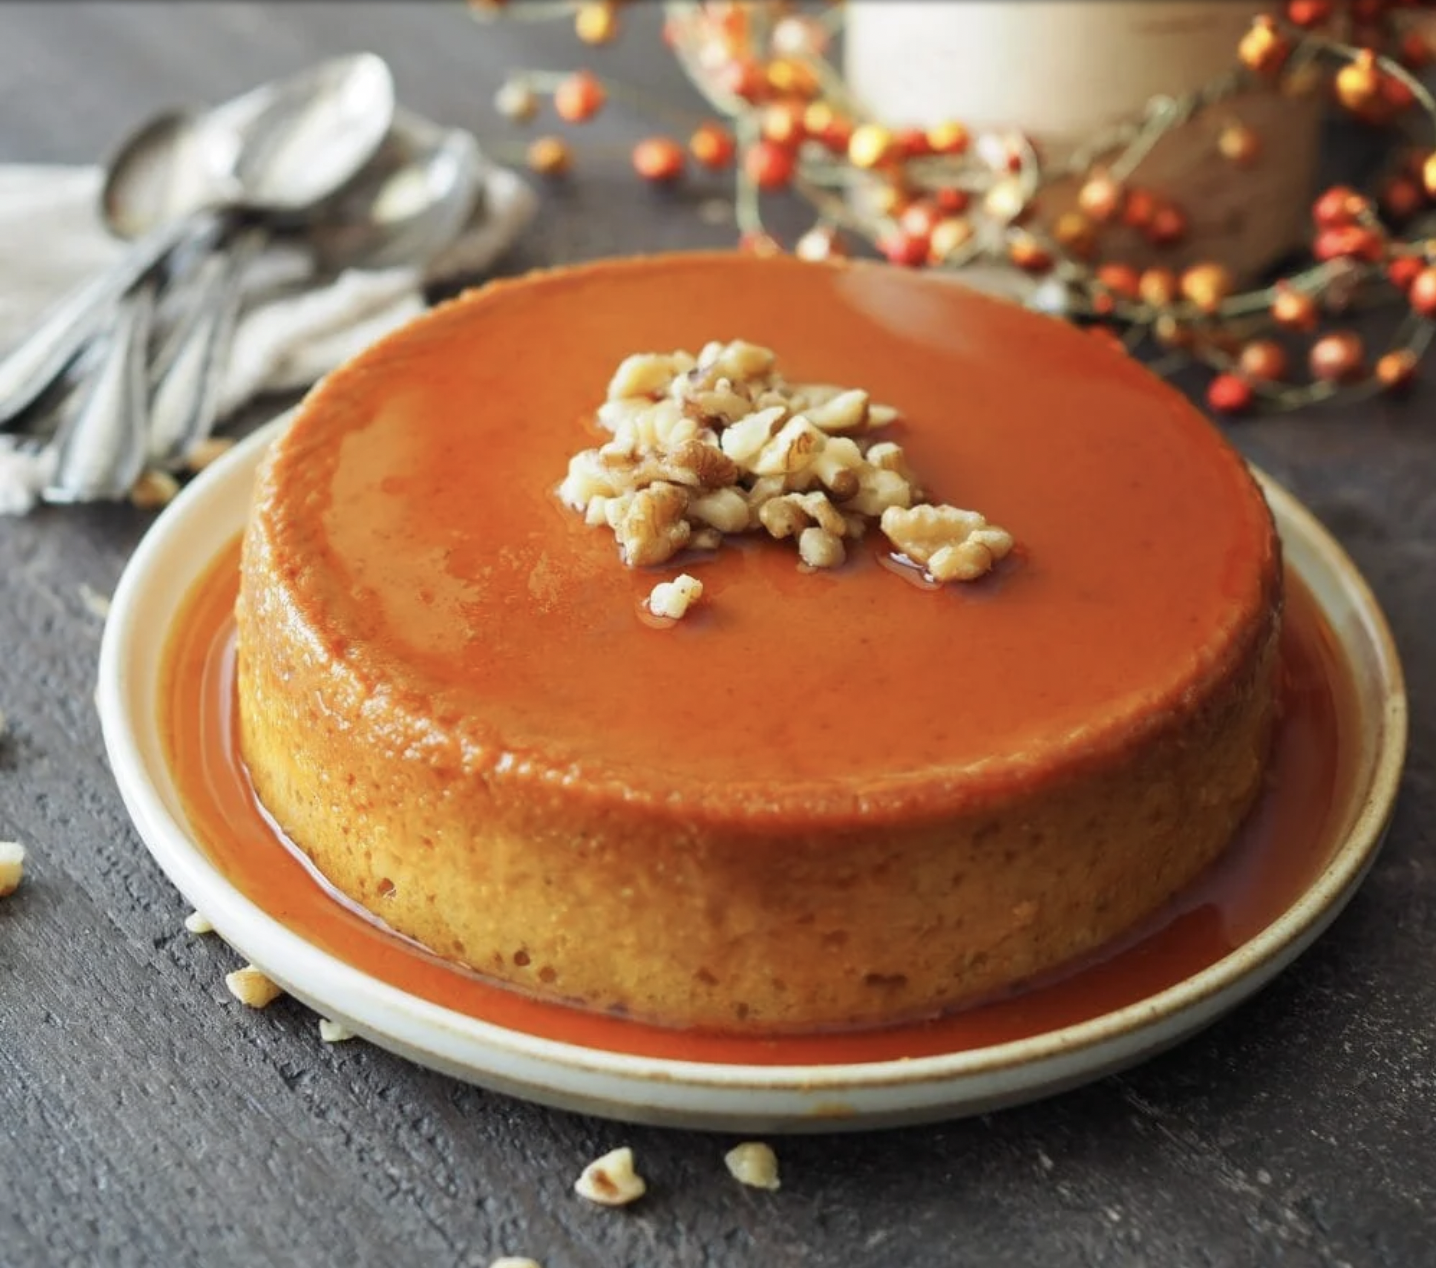 Desserts to Die For: Elevating Your Thanksgiving with Gourmet Sweets